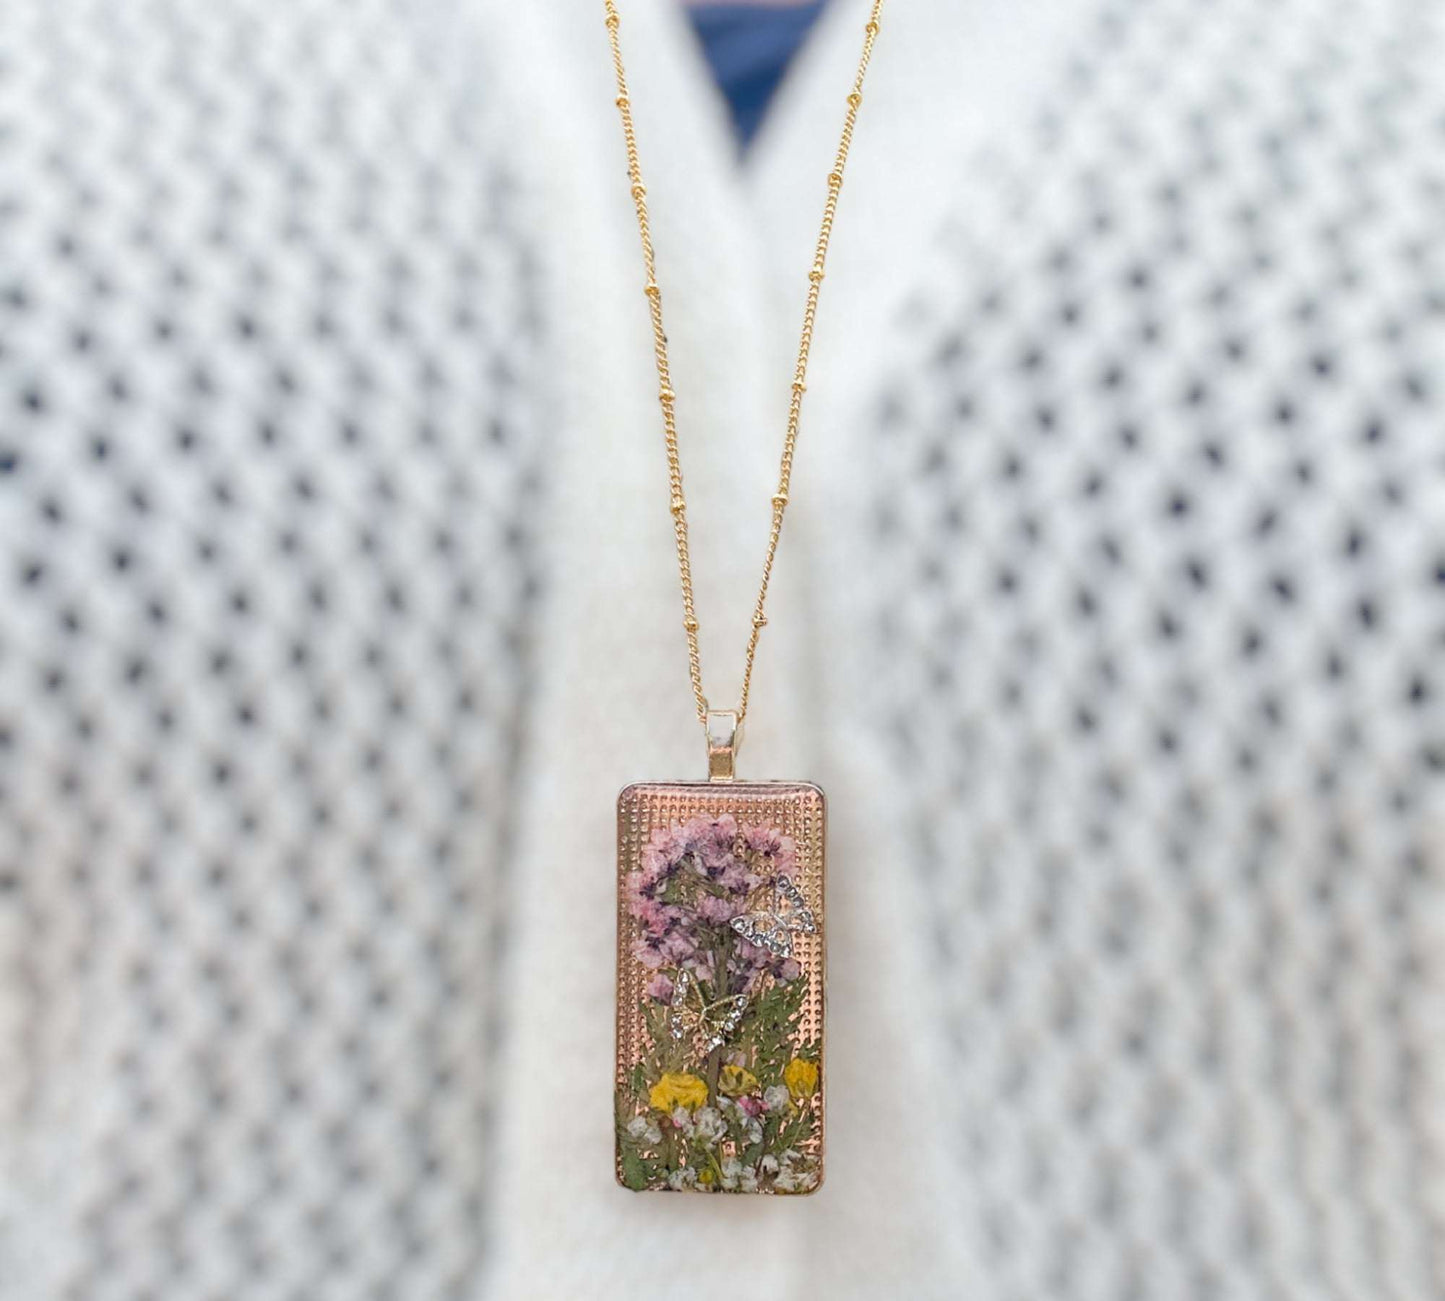 Enchanted Butterfly Garden Necklace  - Handmade Pressed Flower Pendant